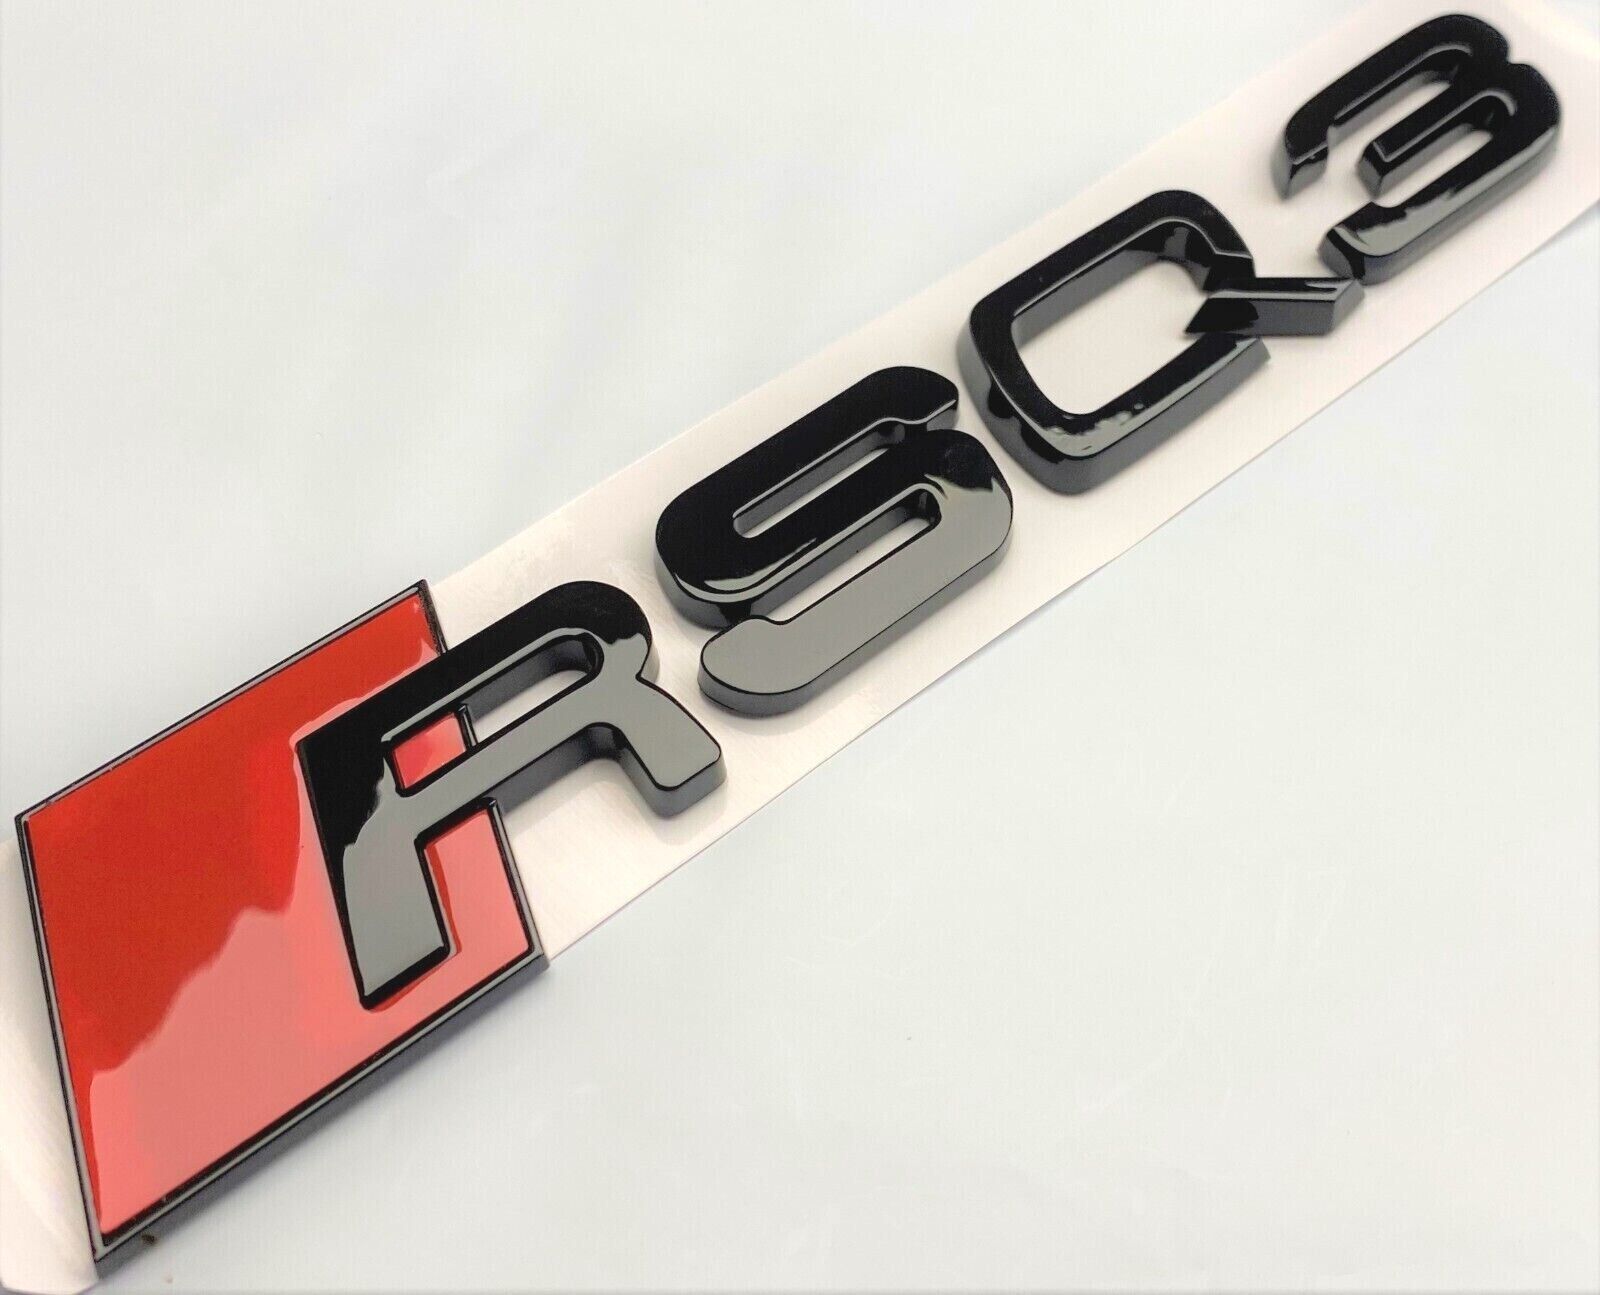 BLACK RSQ3 FIT AUDI RSQ3 REAR TRUNK EMBLEM BADGE NAME DECAL LETTER NUMBER